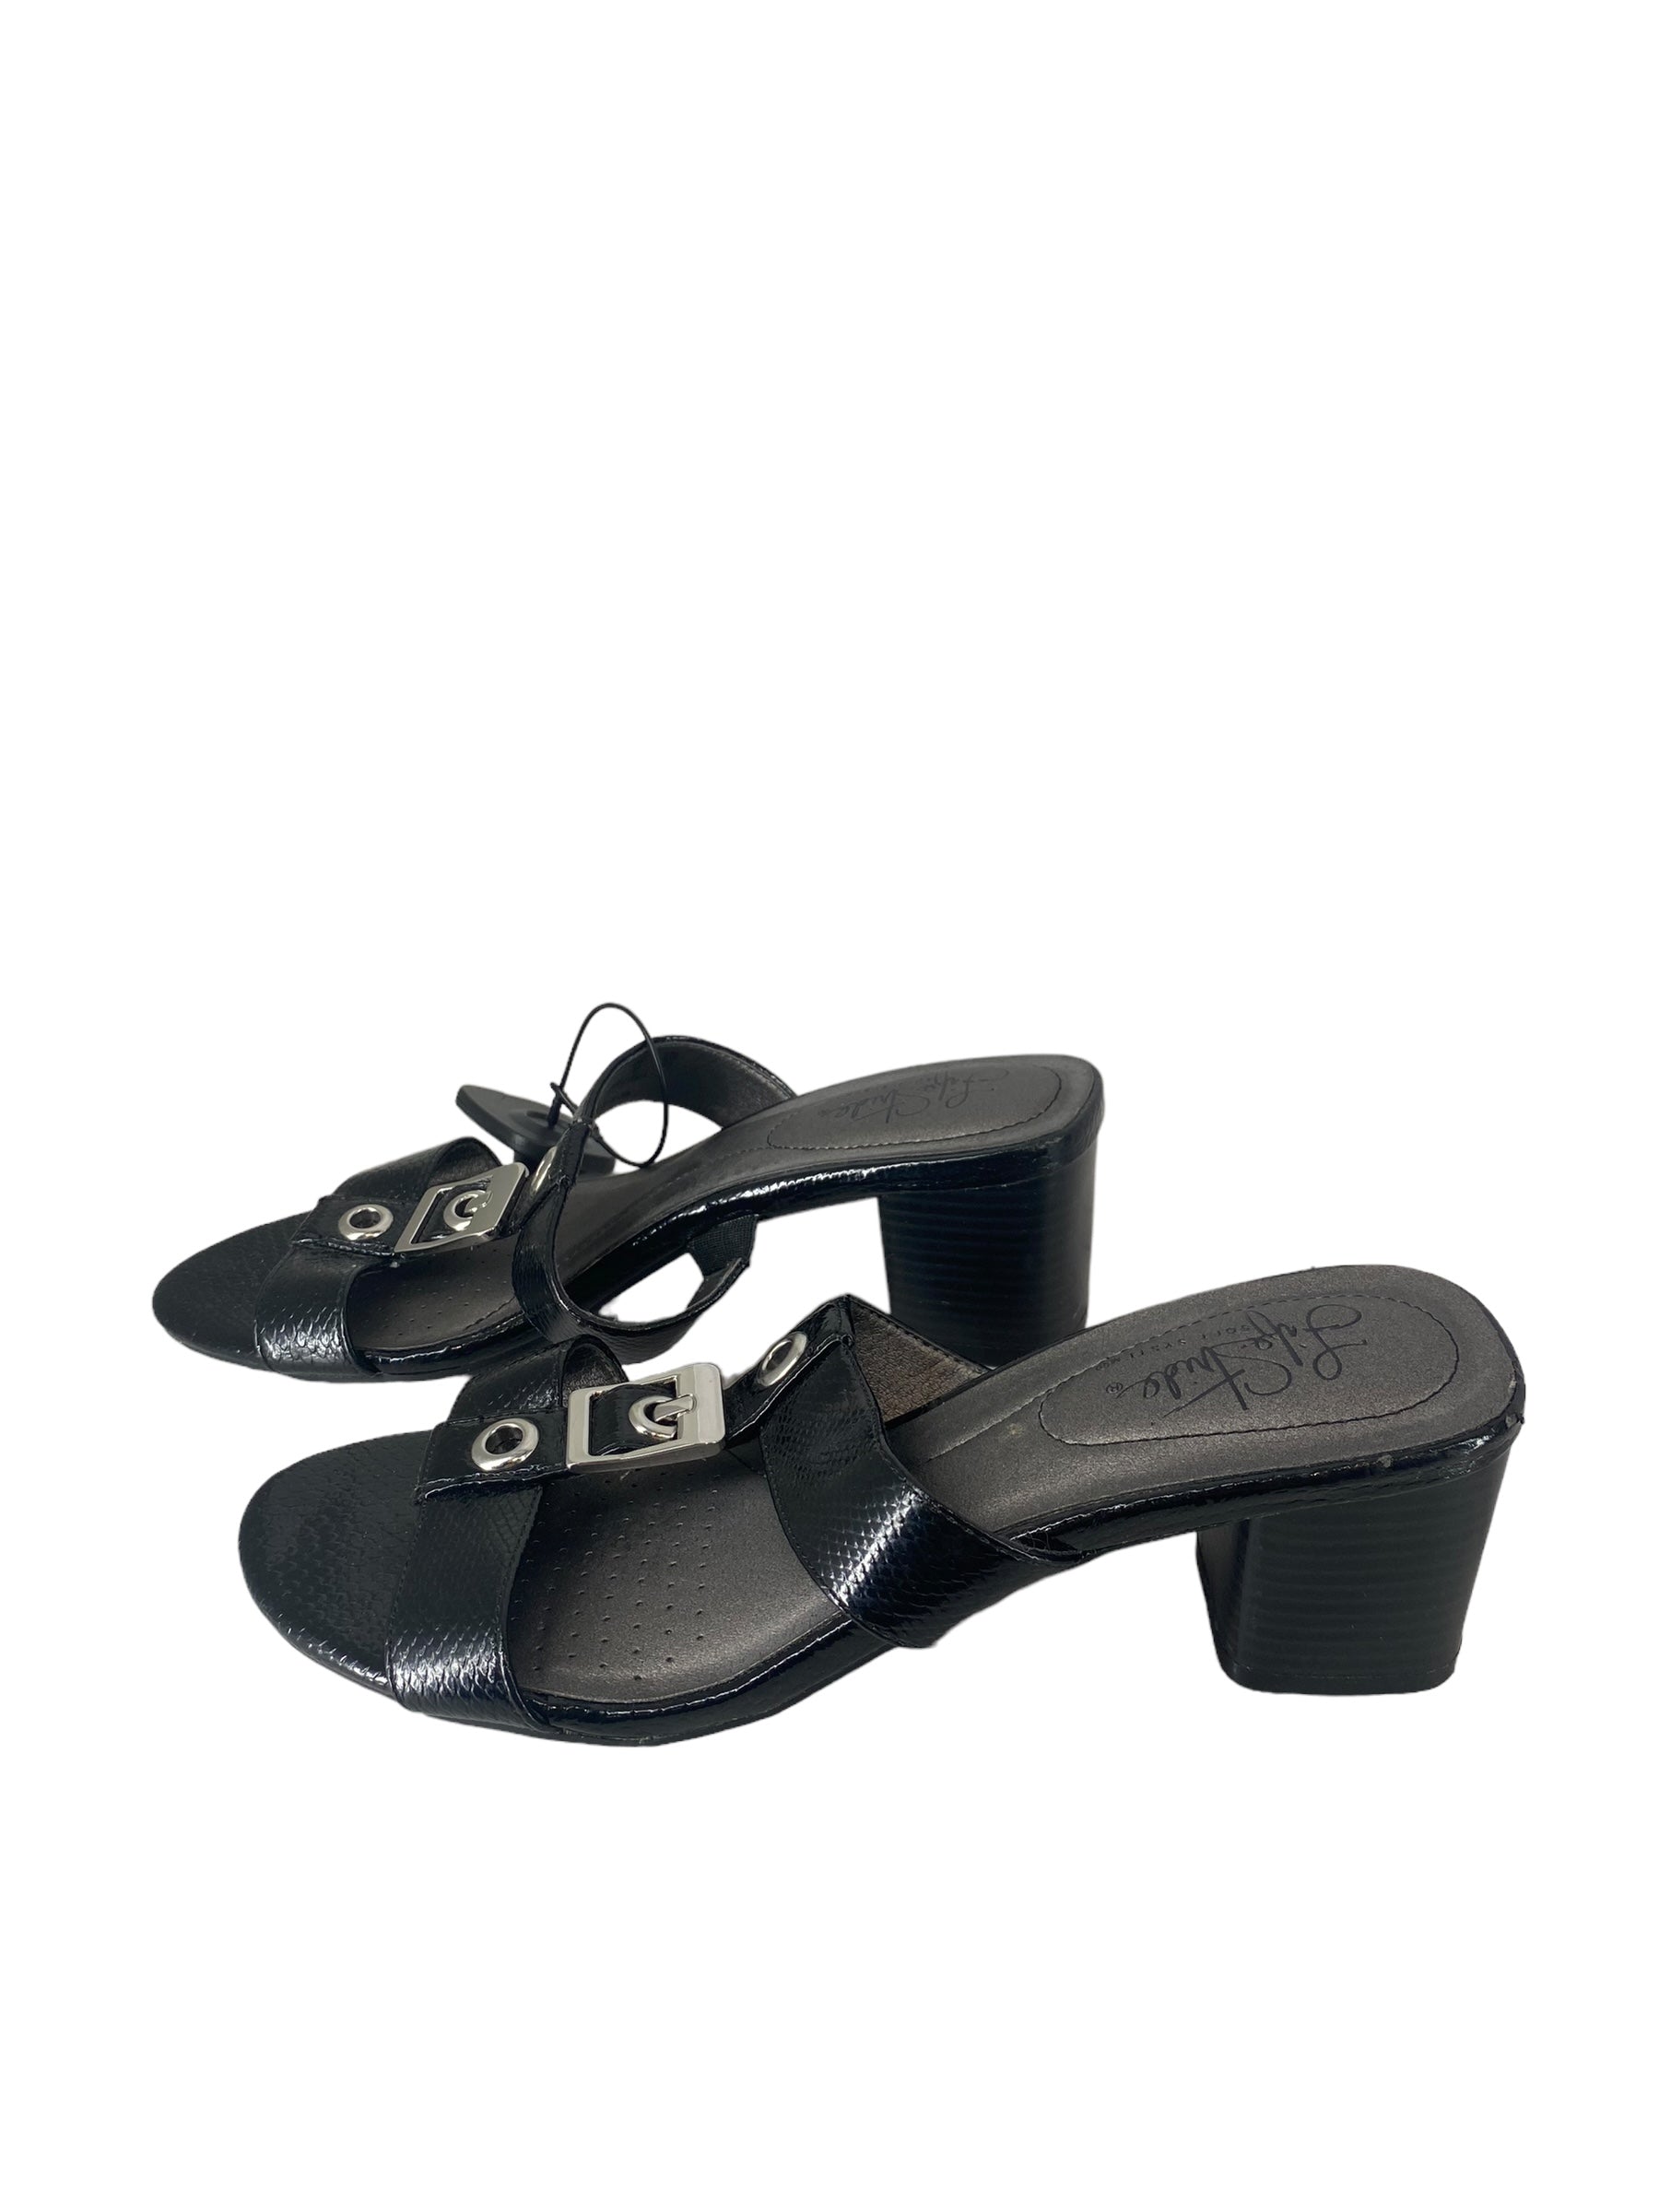 Sandals Heels Block By Life Stride Size: 8